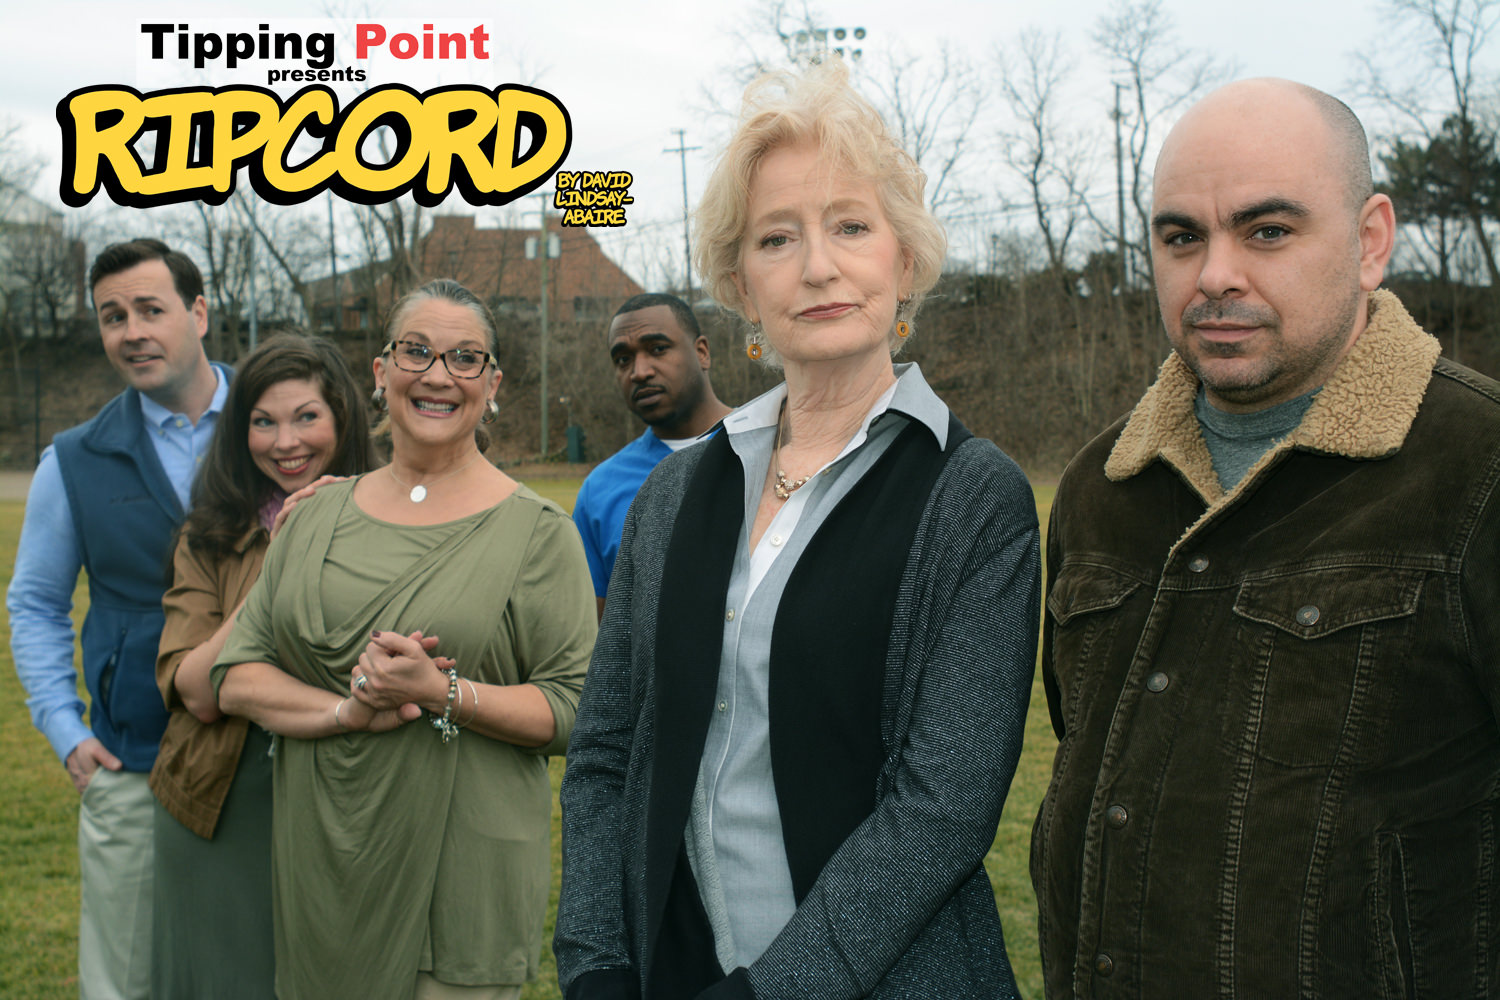 Tipping Point Theatre's production of Ripcord runs March 22 - April 22. Photo by Megan LaCroix Photography.